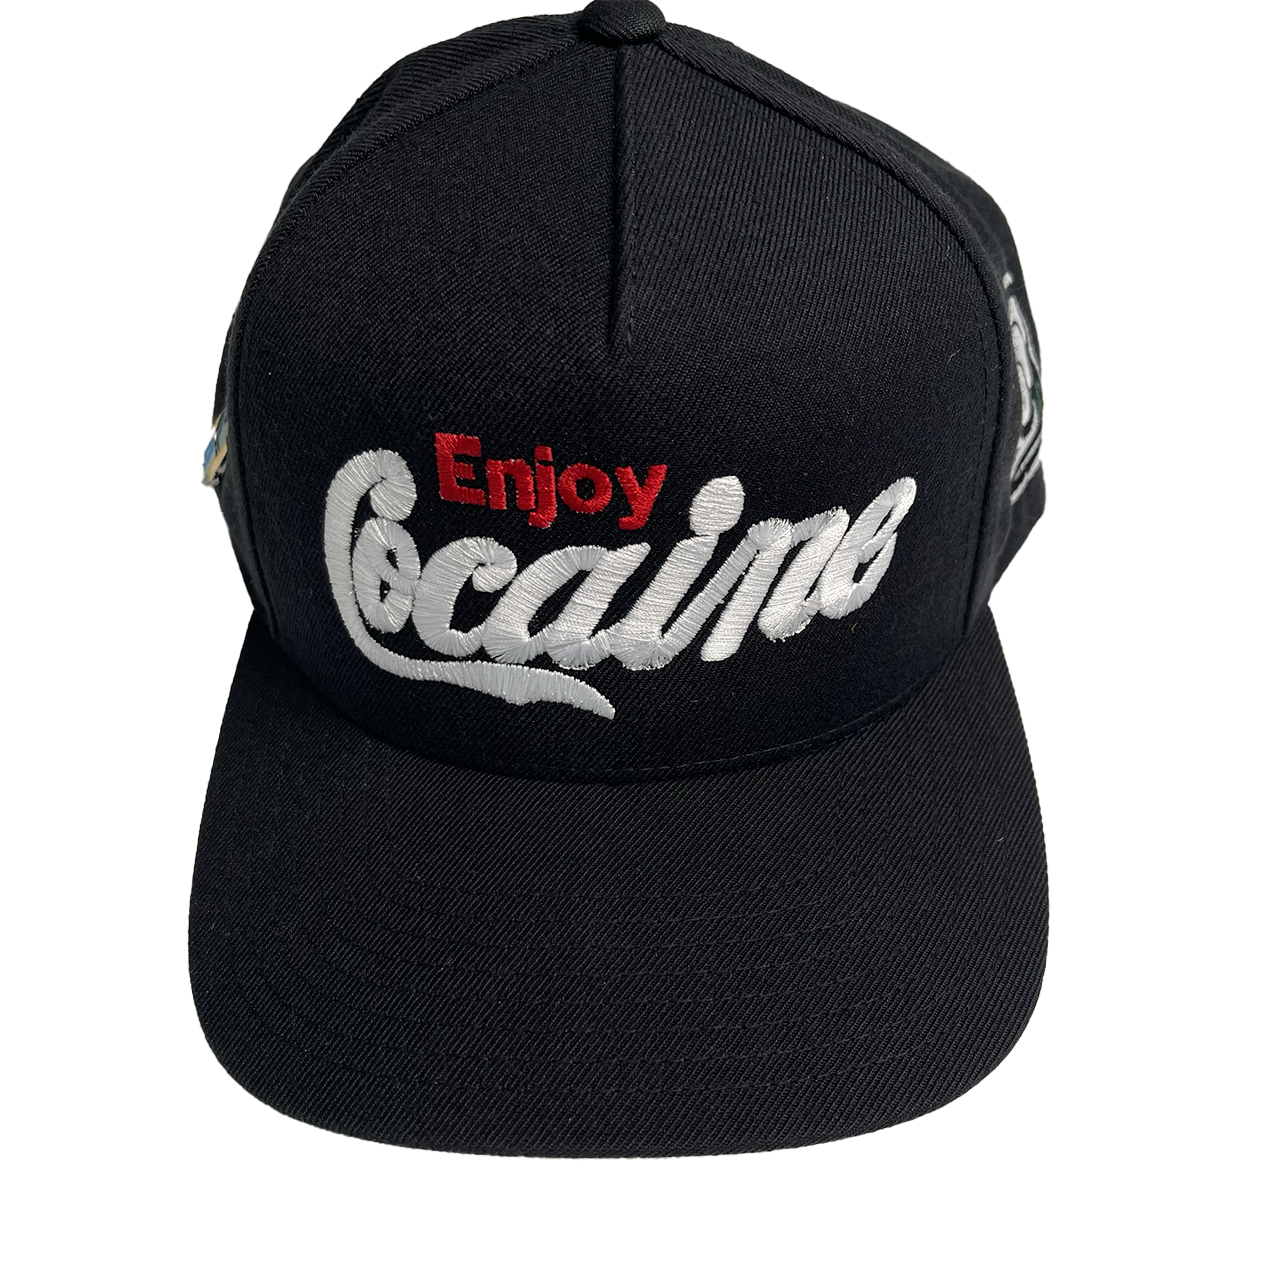 Enjoy Cocaine Embroidered Hat